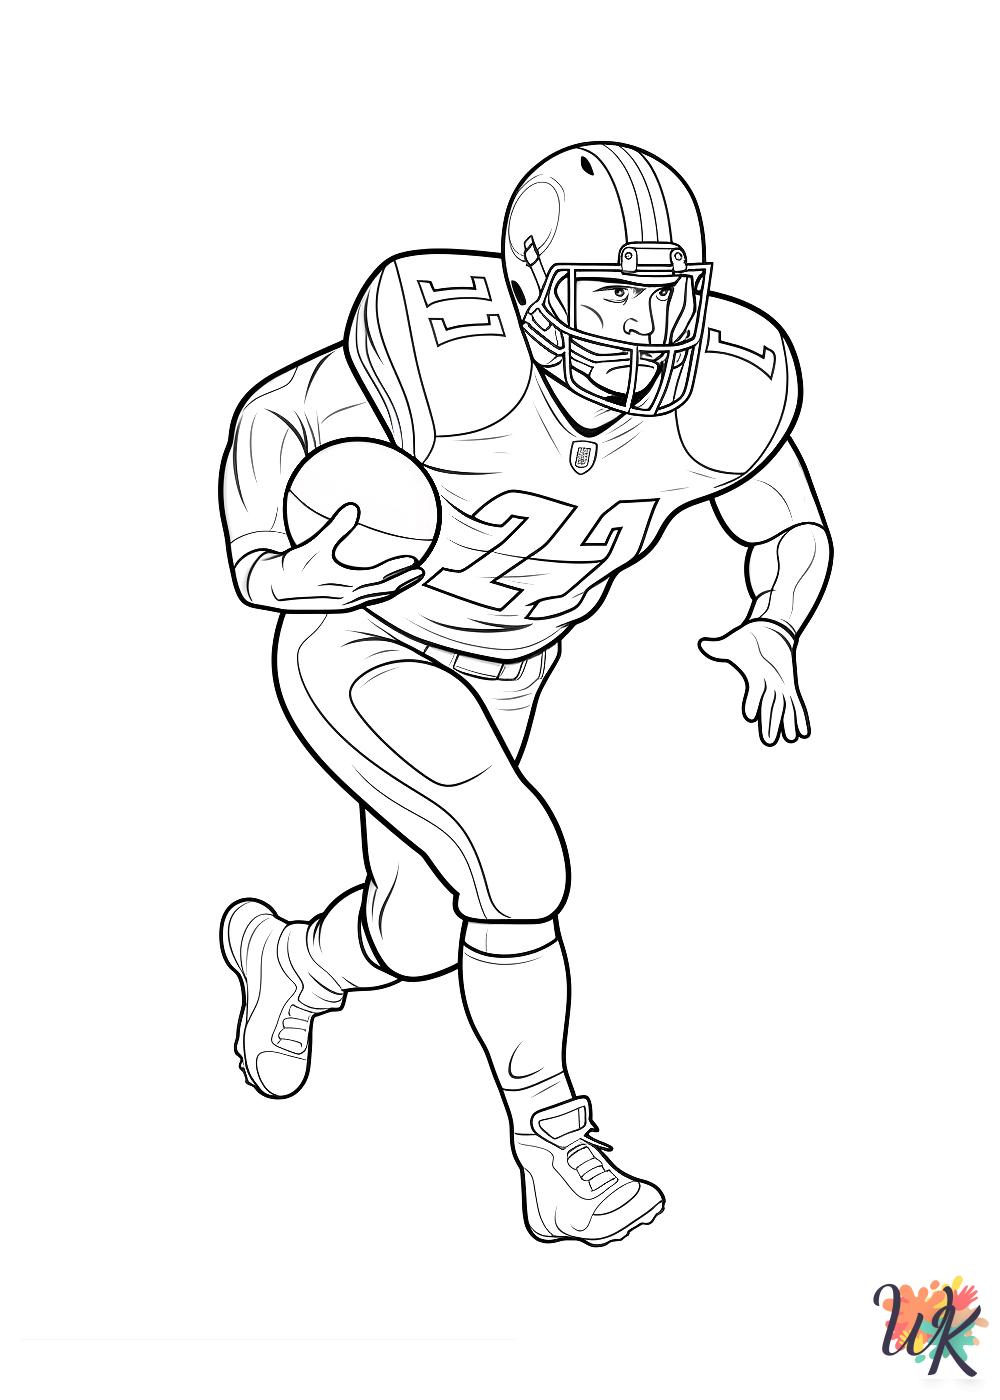 free full size printable NFL coloring pages for adults pdf